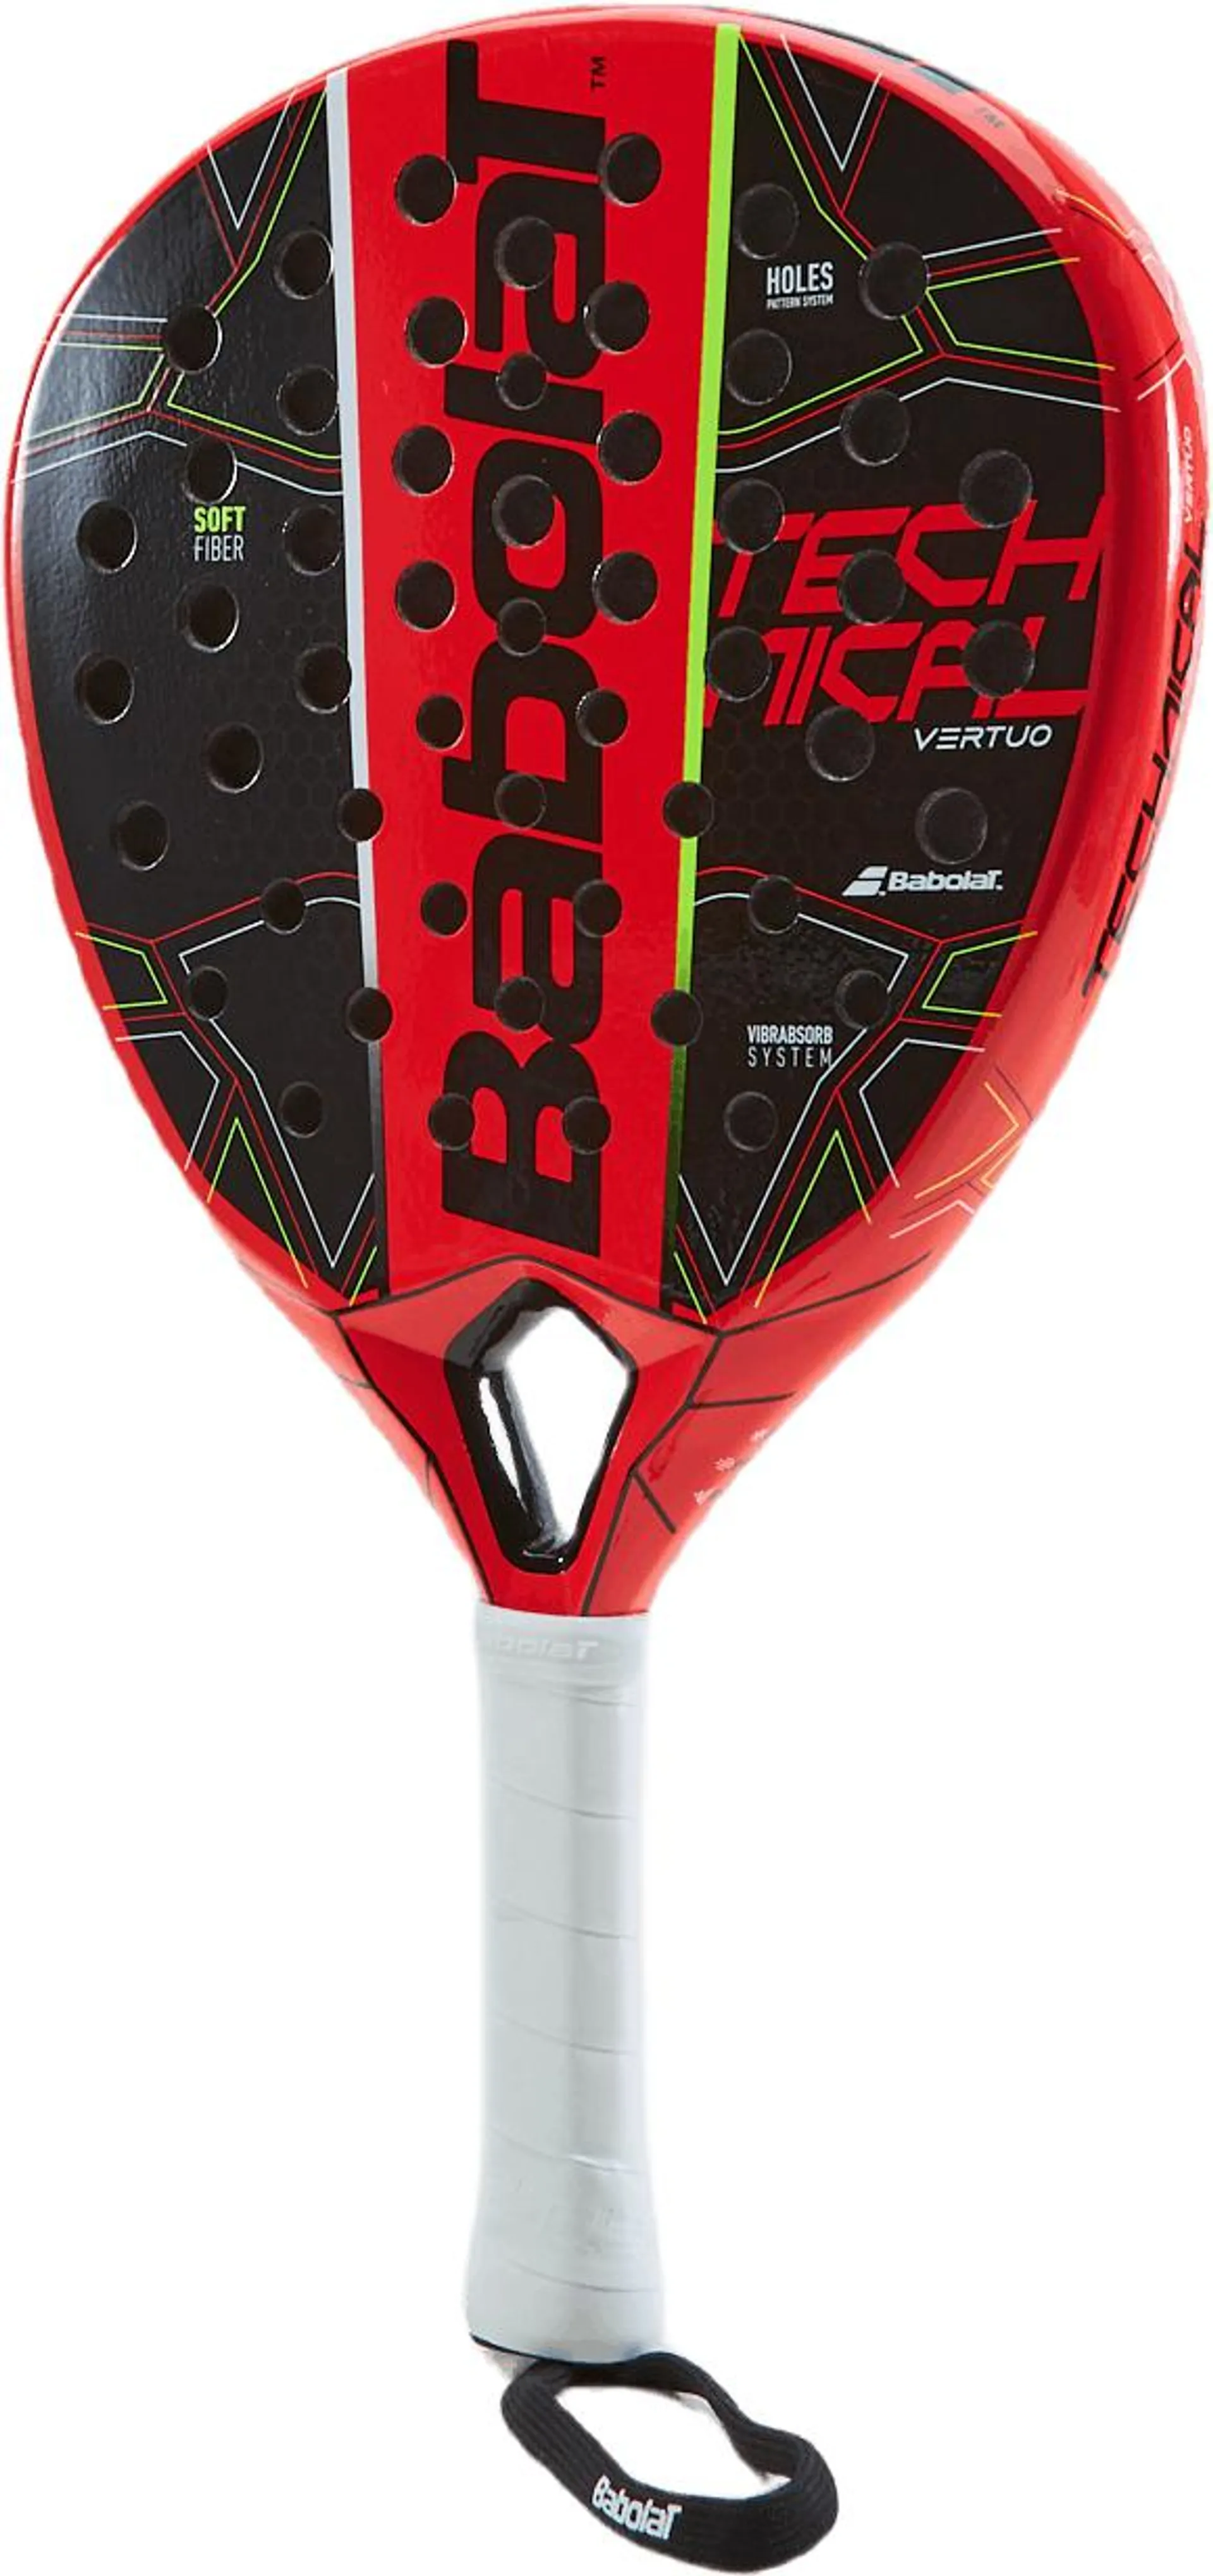 Vertuo Technical Red/black